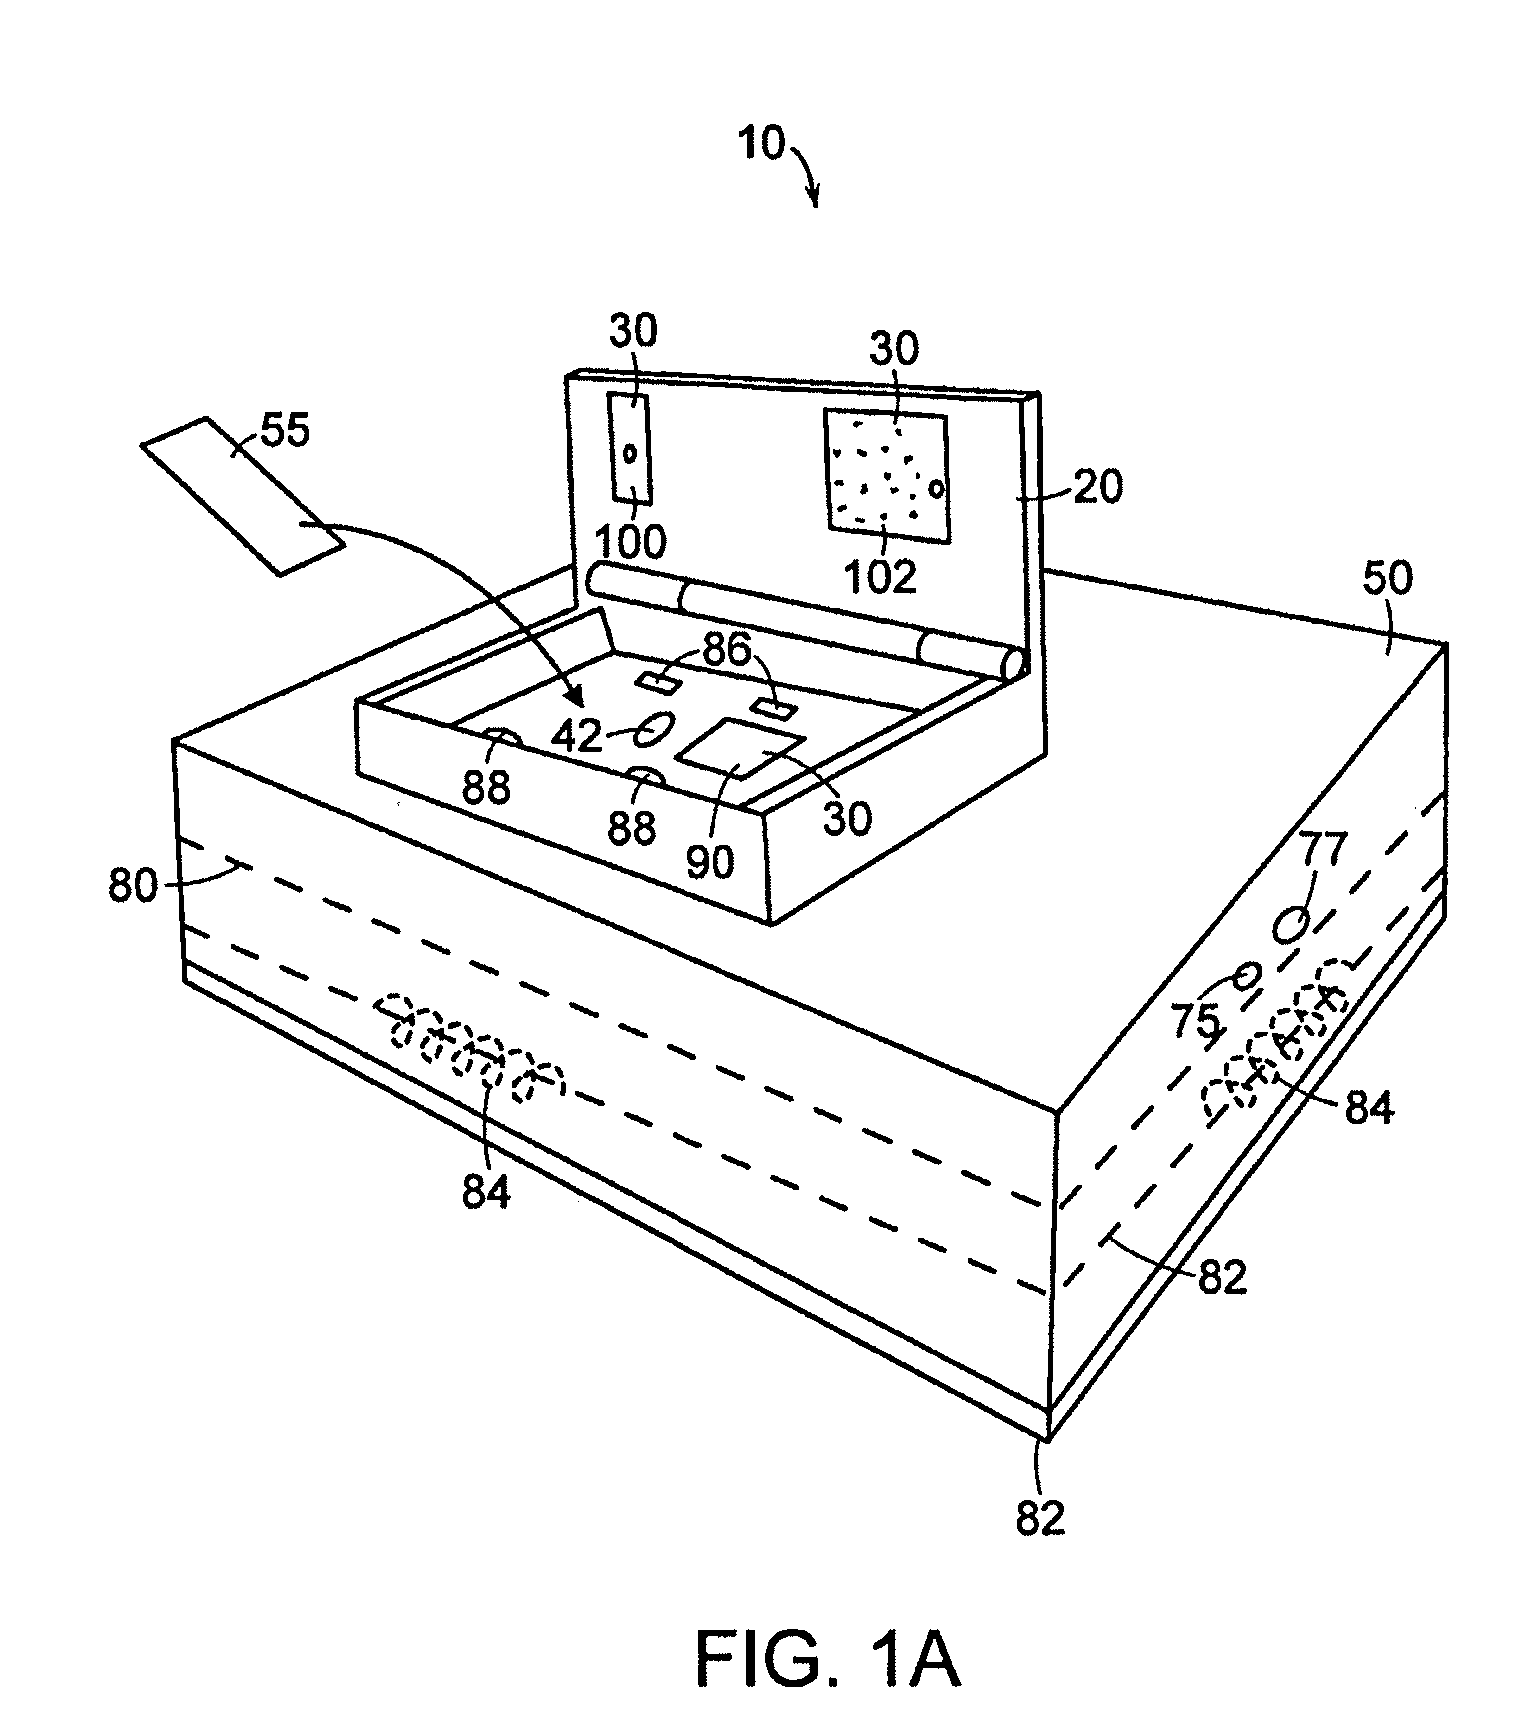 Ruggedized apparatus for analysis of nucleic acid and proteins